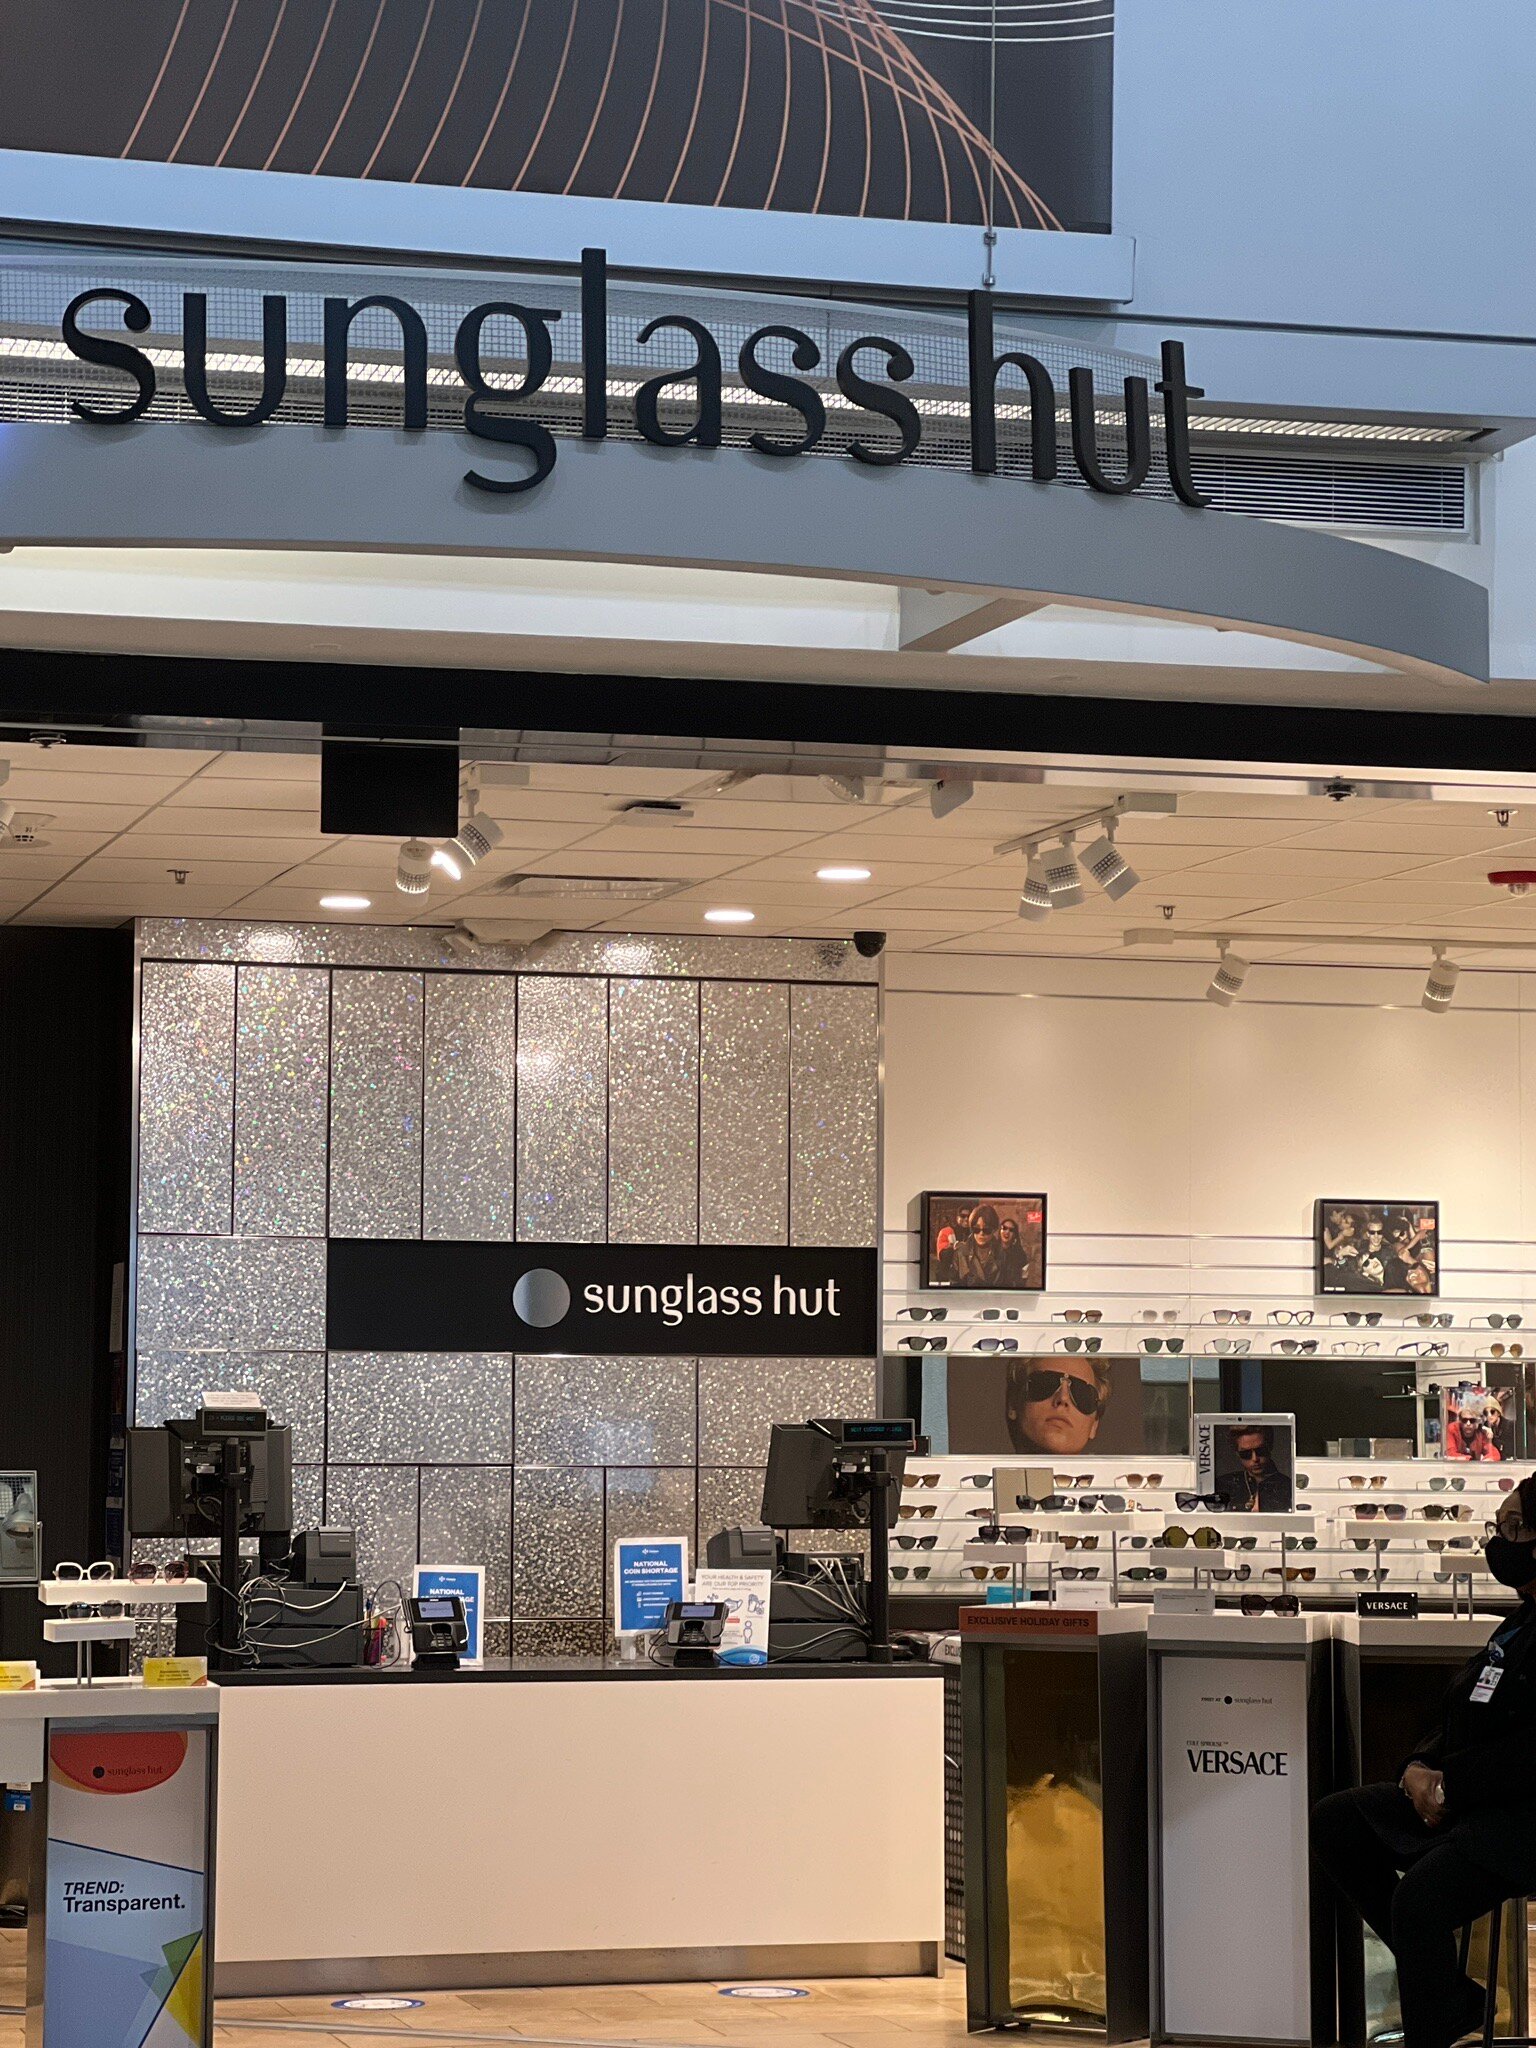 Sunglass Hut Canada Discounts and Cash Back for Military, Nurses, & More |  ID.me Shop